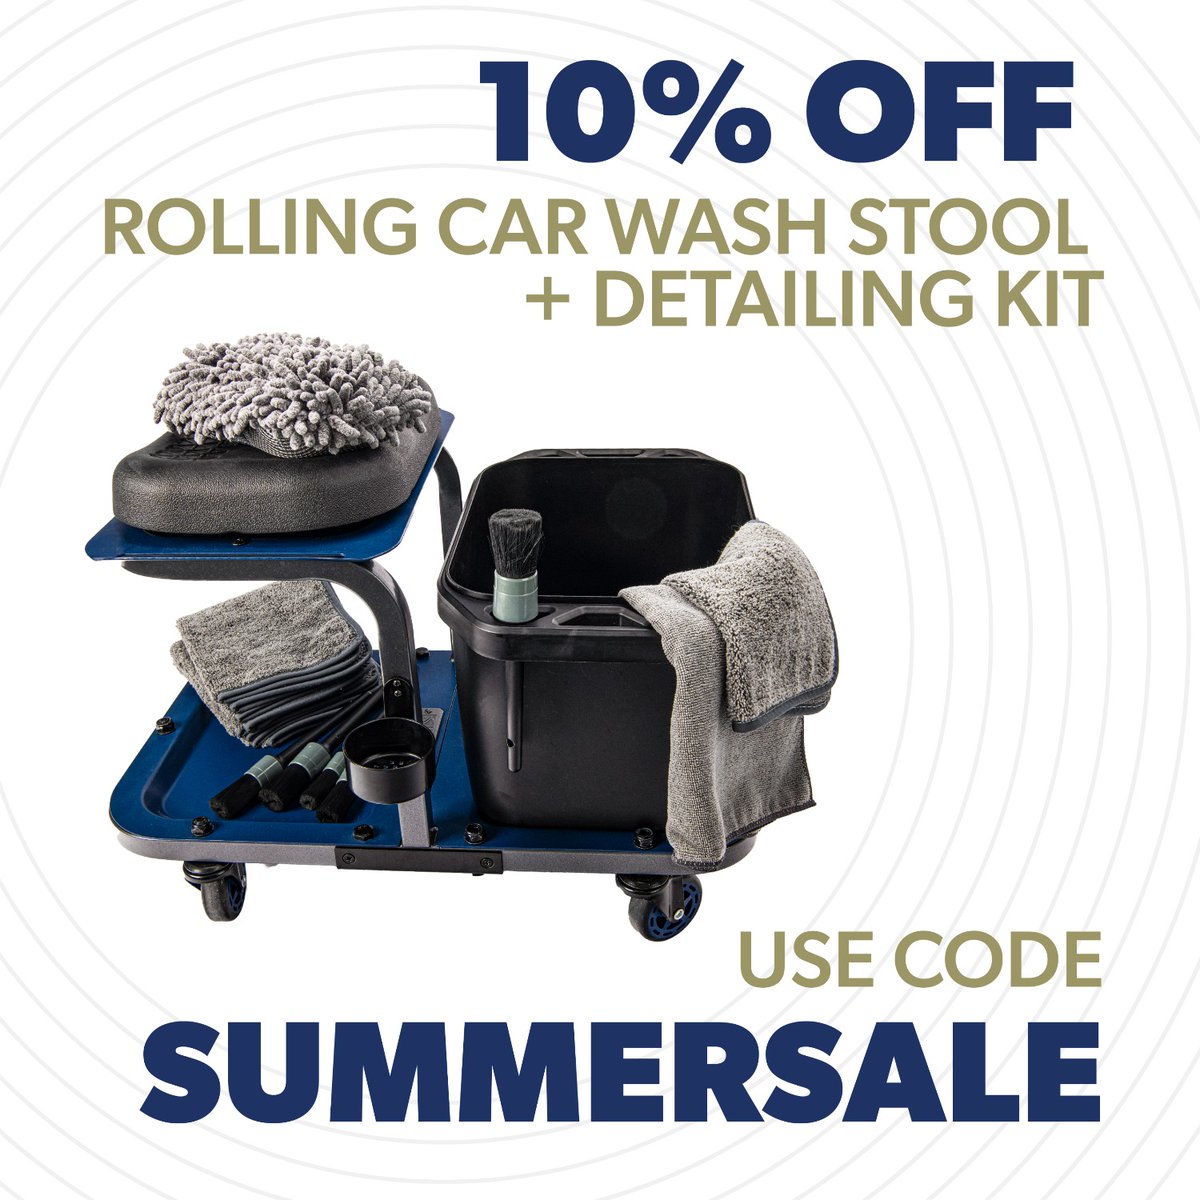 Perfection. 👌
Save your back with an easier and more efficient way to wash and detail your car! The Rolling Carwash Stool + Detailing Kit combo is now 10% off with code SUMMERSALE.
.
.
#UrbanTransit #Sale #RollingCarWashStool #CarWash #GarageEssentials #CleanCar #CarTools